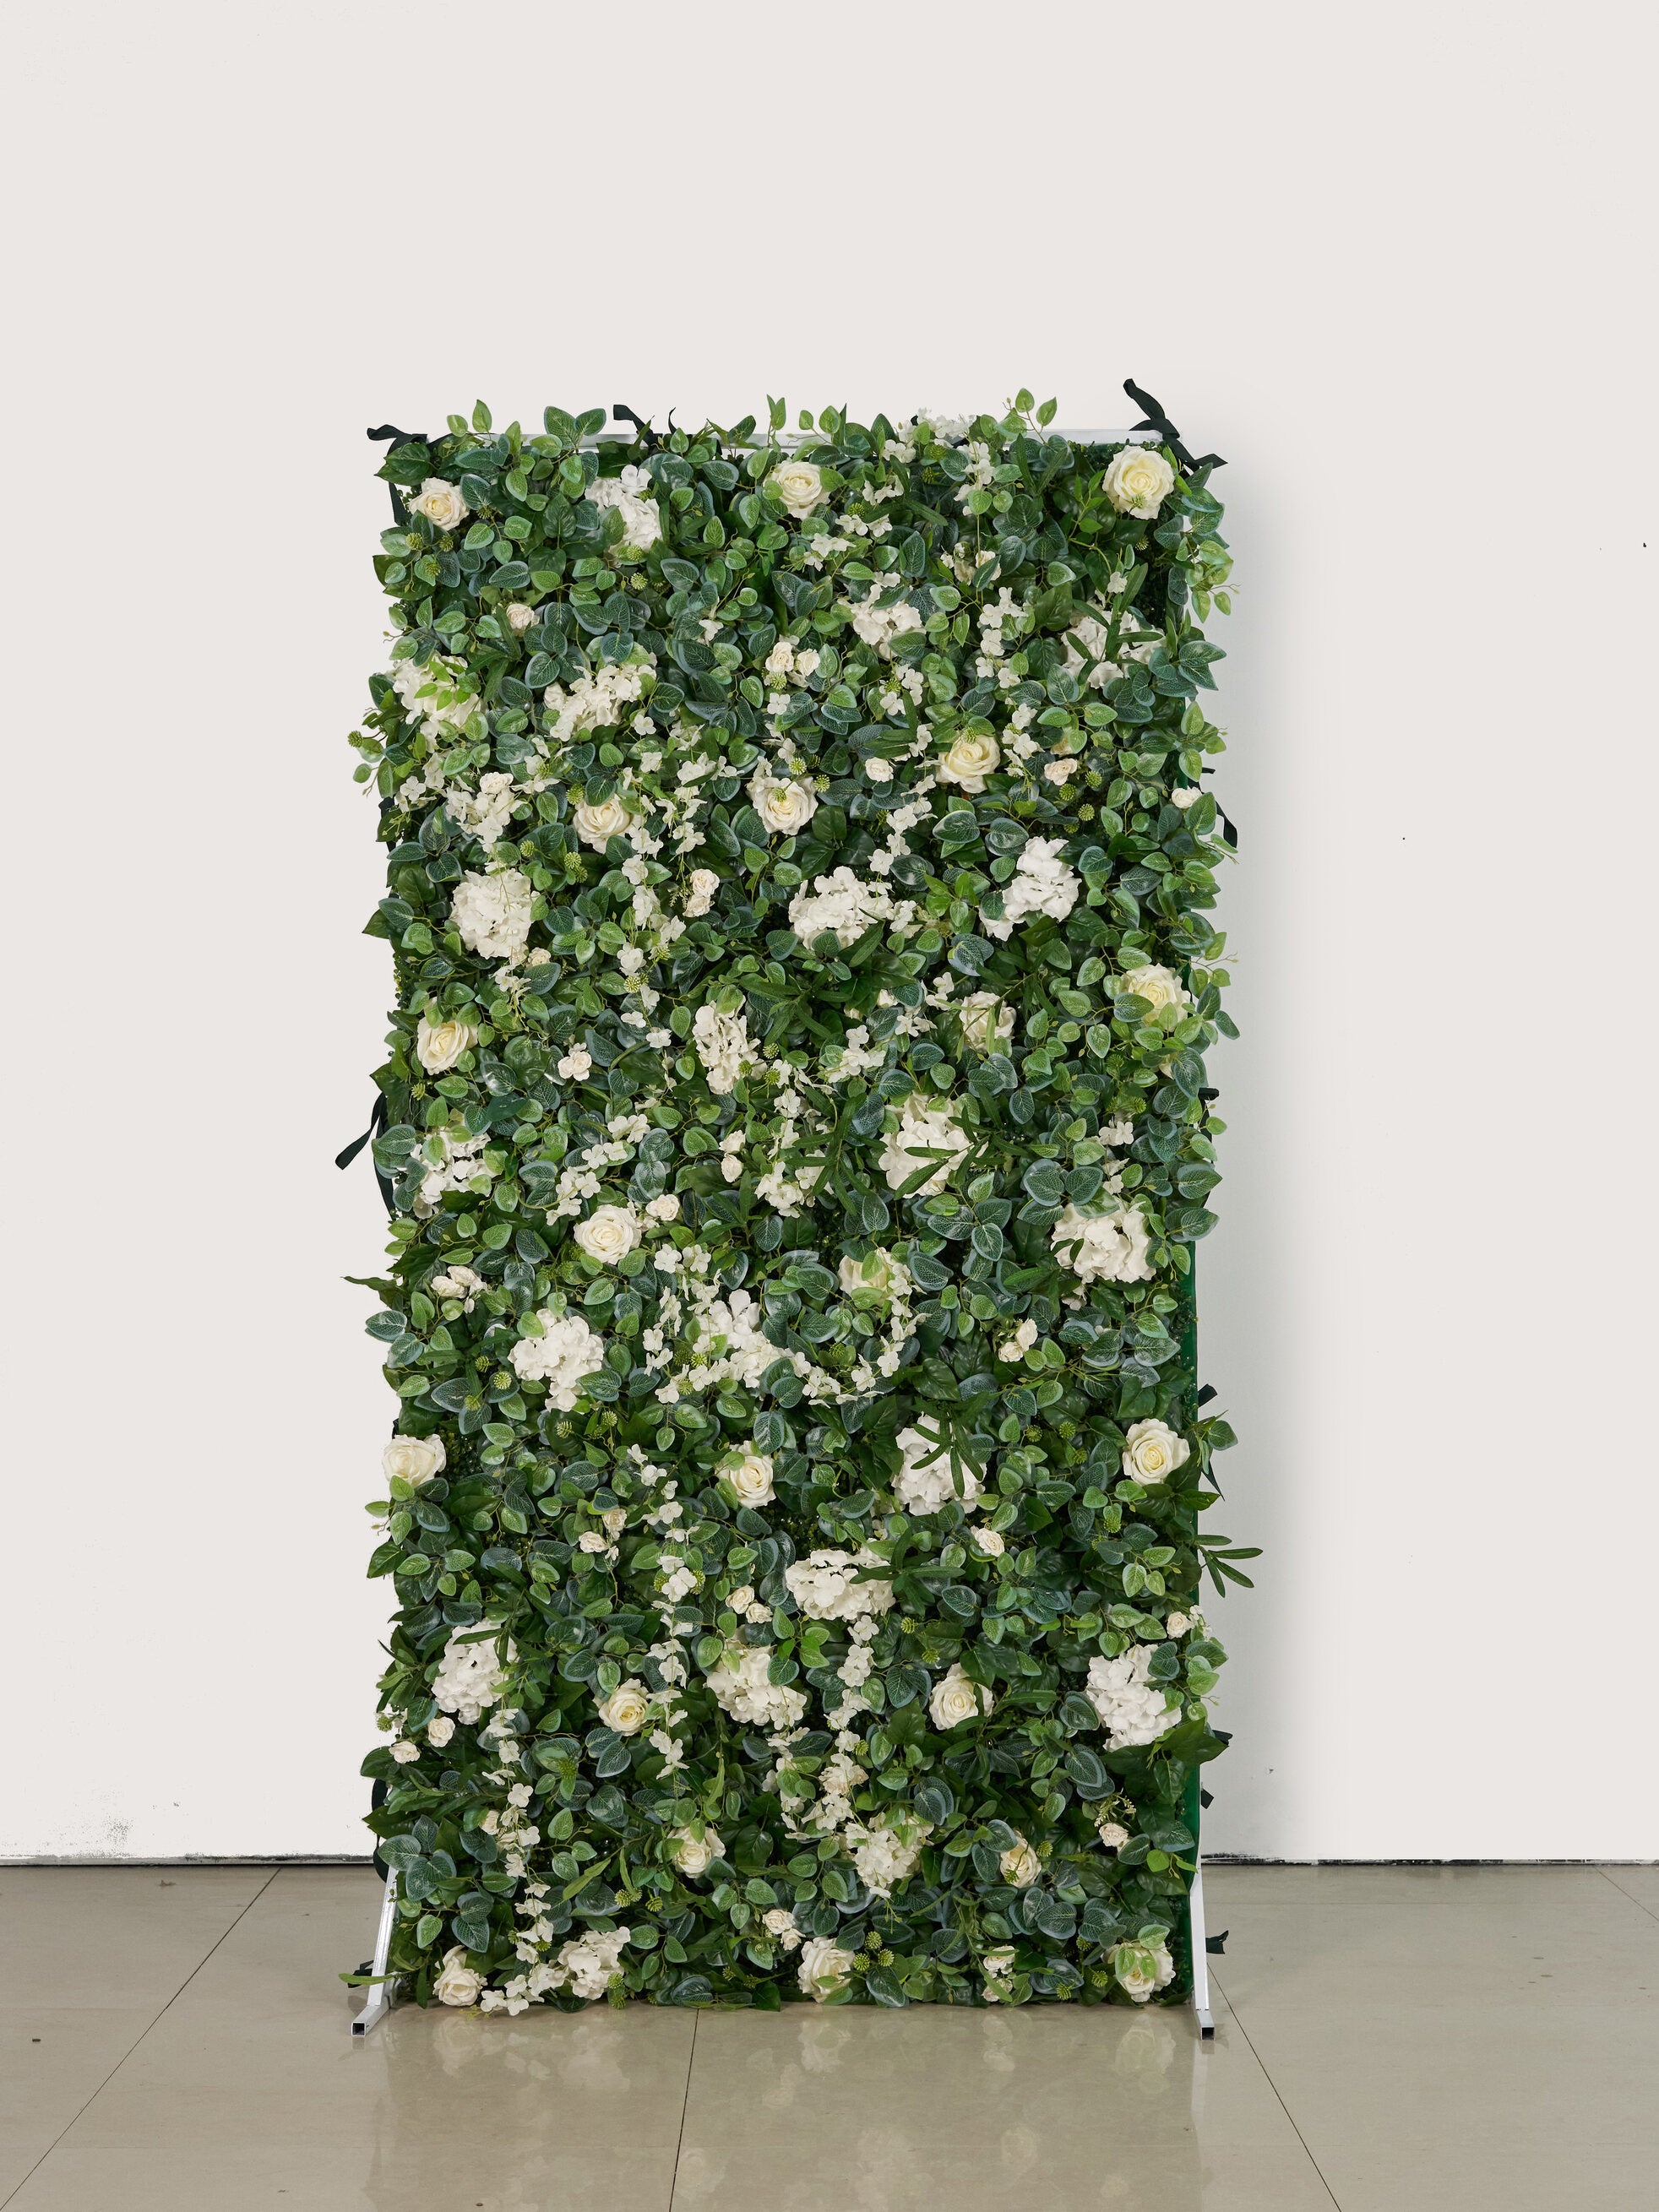 Flower Wall White Rose & Green B Fabric Rolling Up Curtain Floral Backdrop Wedding Party Proposal Decor